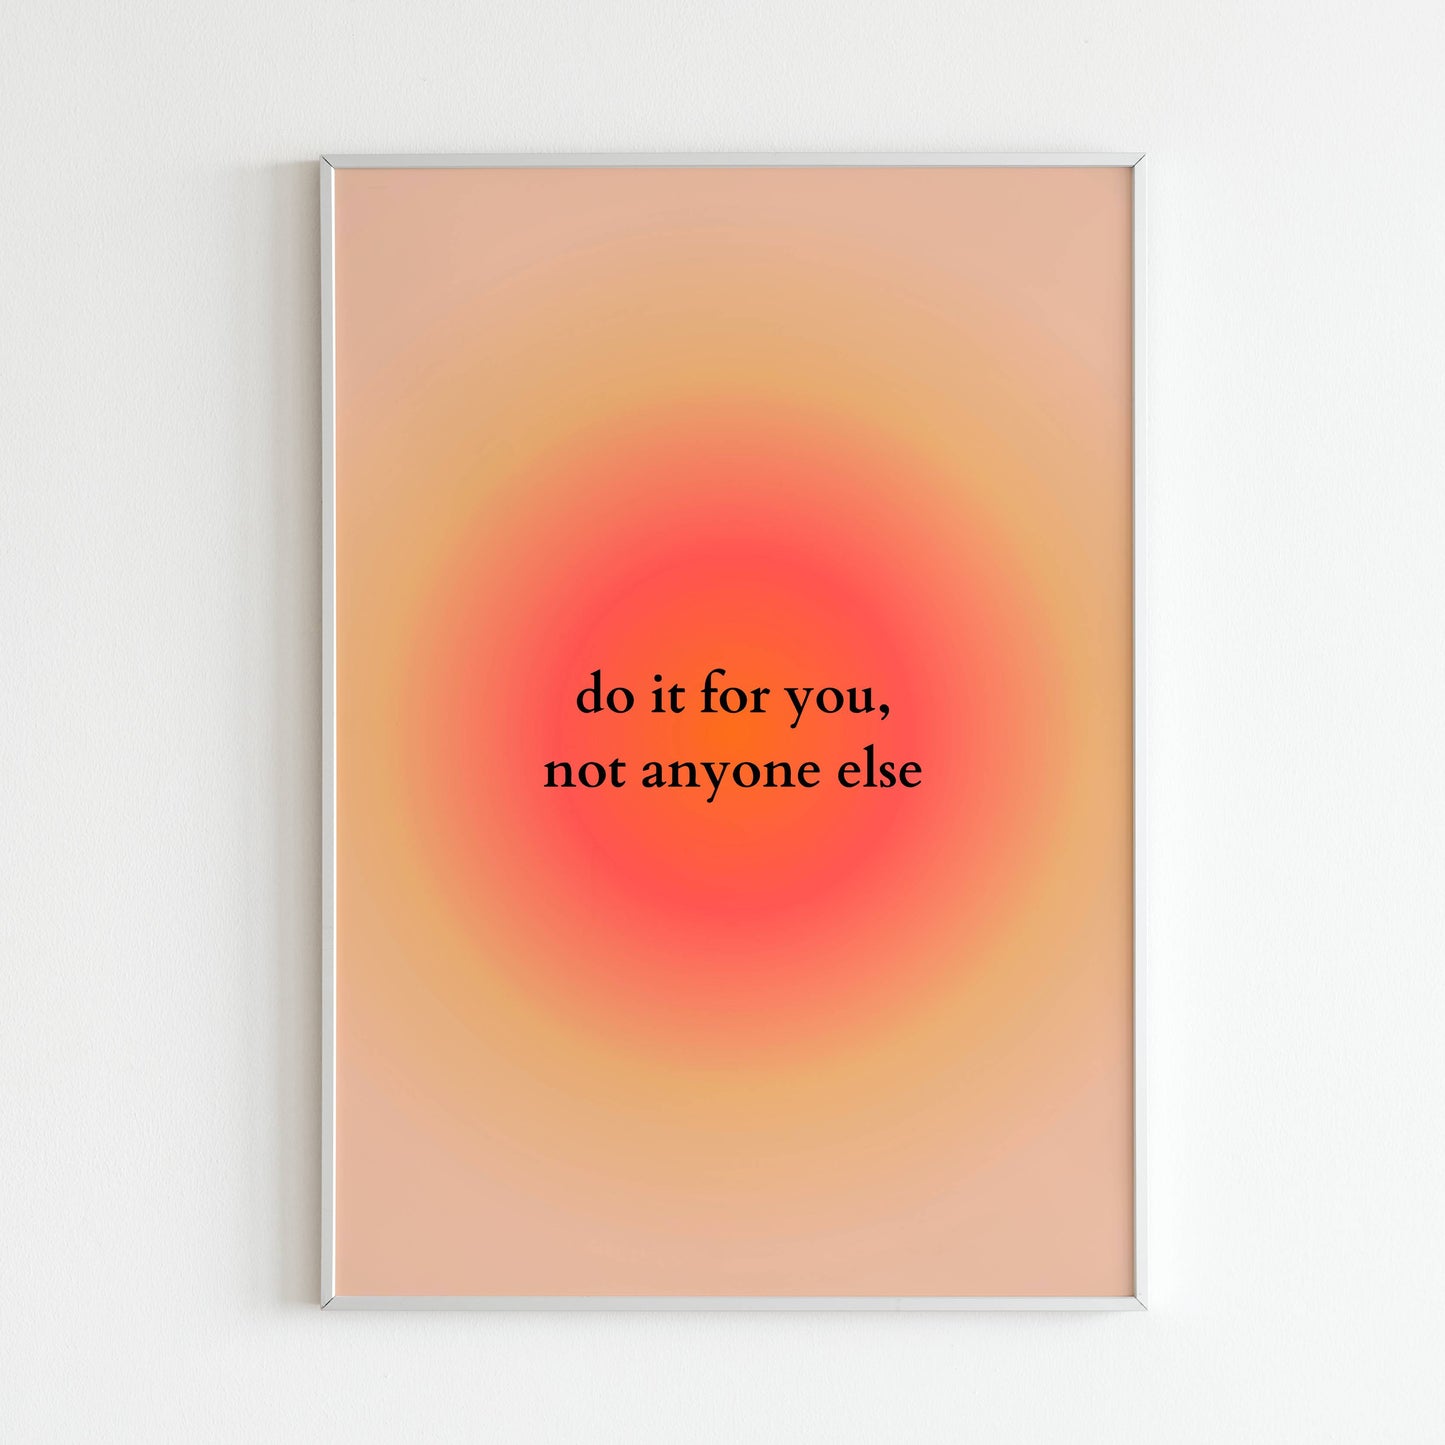 Downloadable "Do it for you" wall art for a reminder to prioritize your own goals.